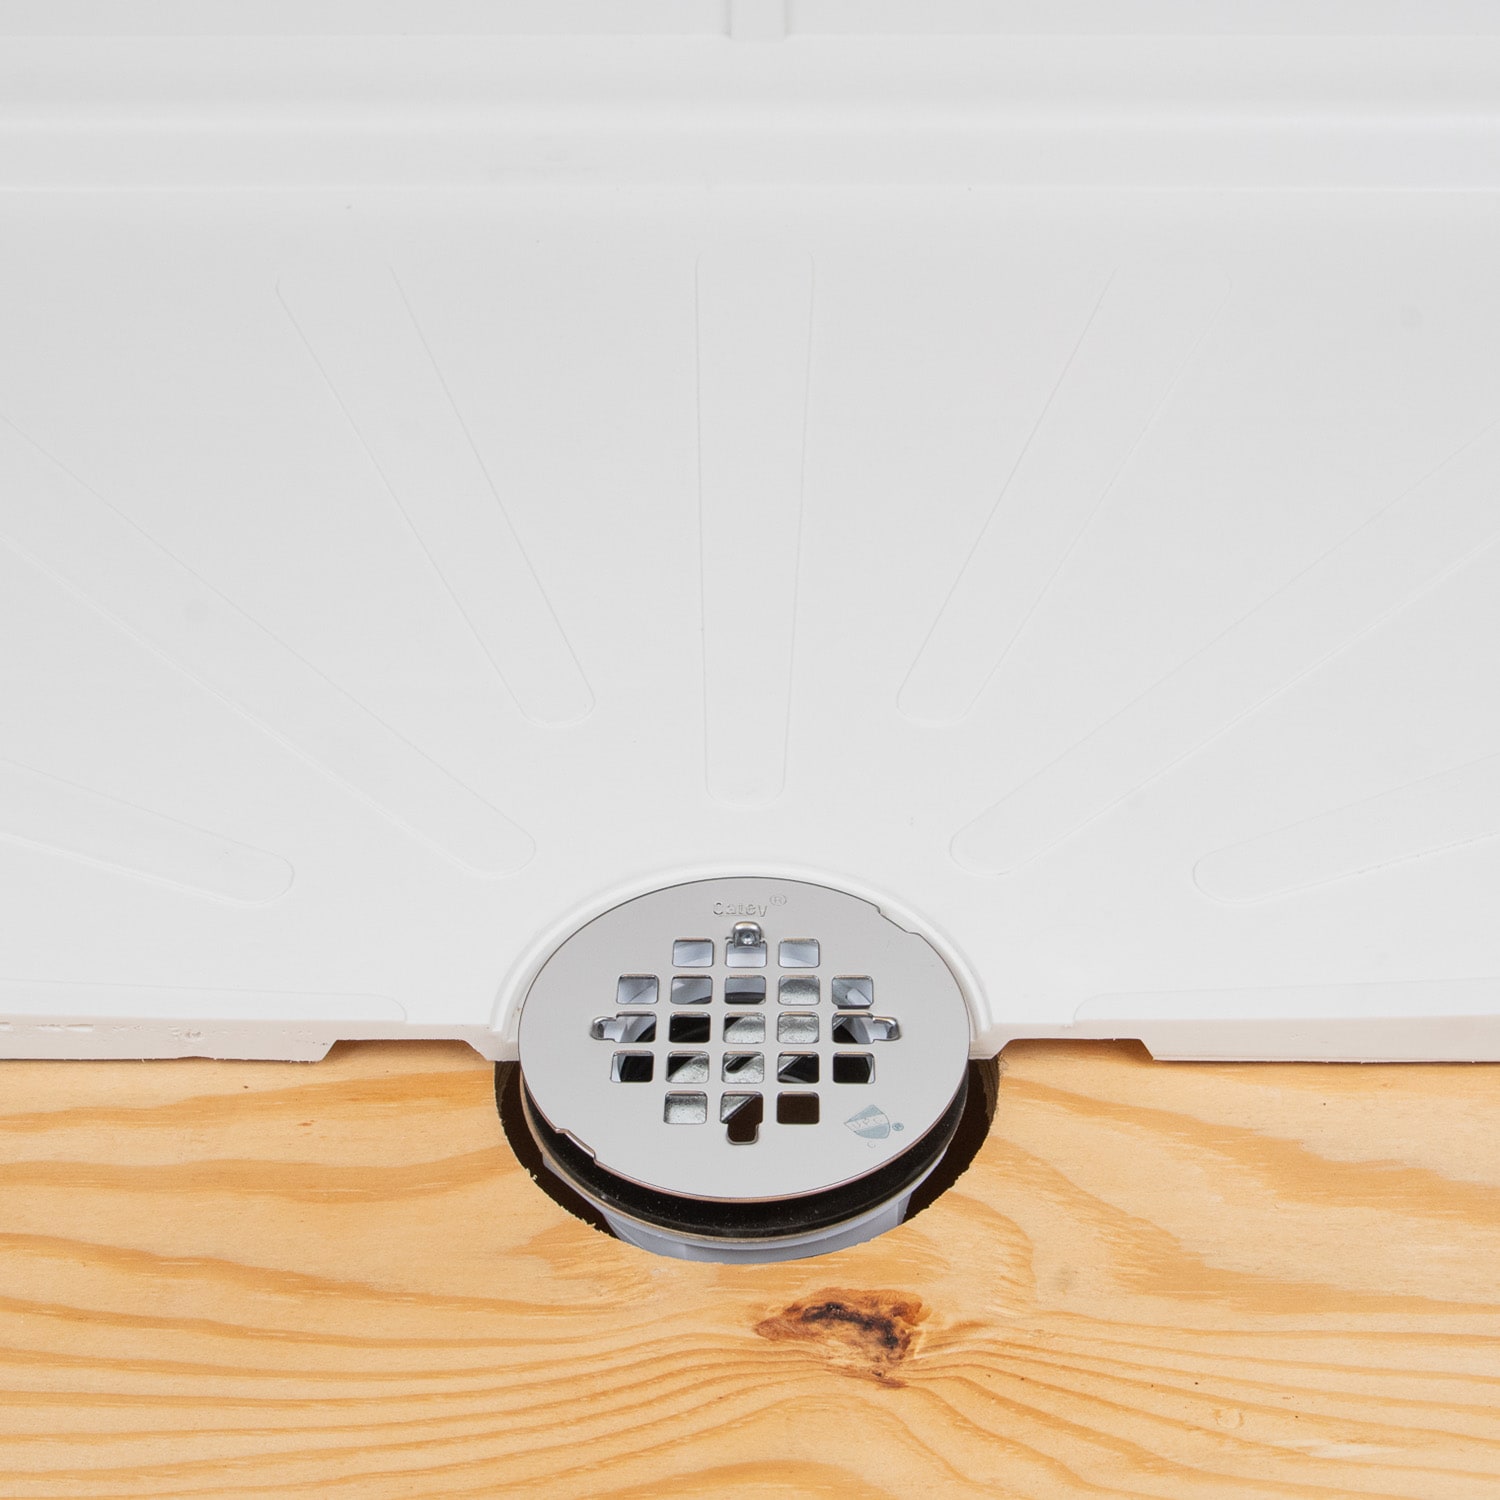 How Does A Shower Drain Work? [Answered] ‐ Fixed Today Plumbing